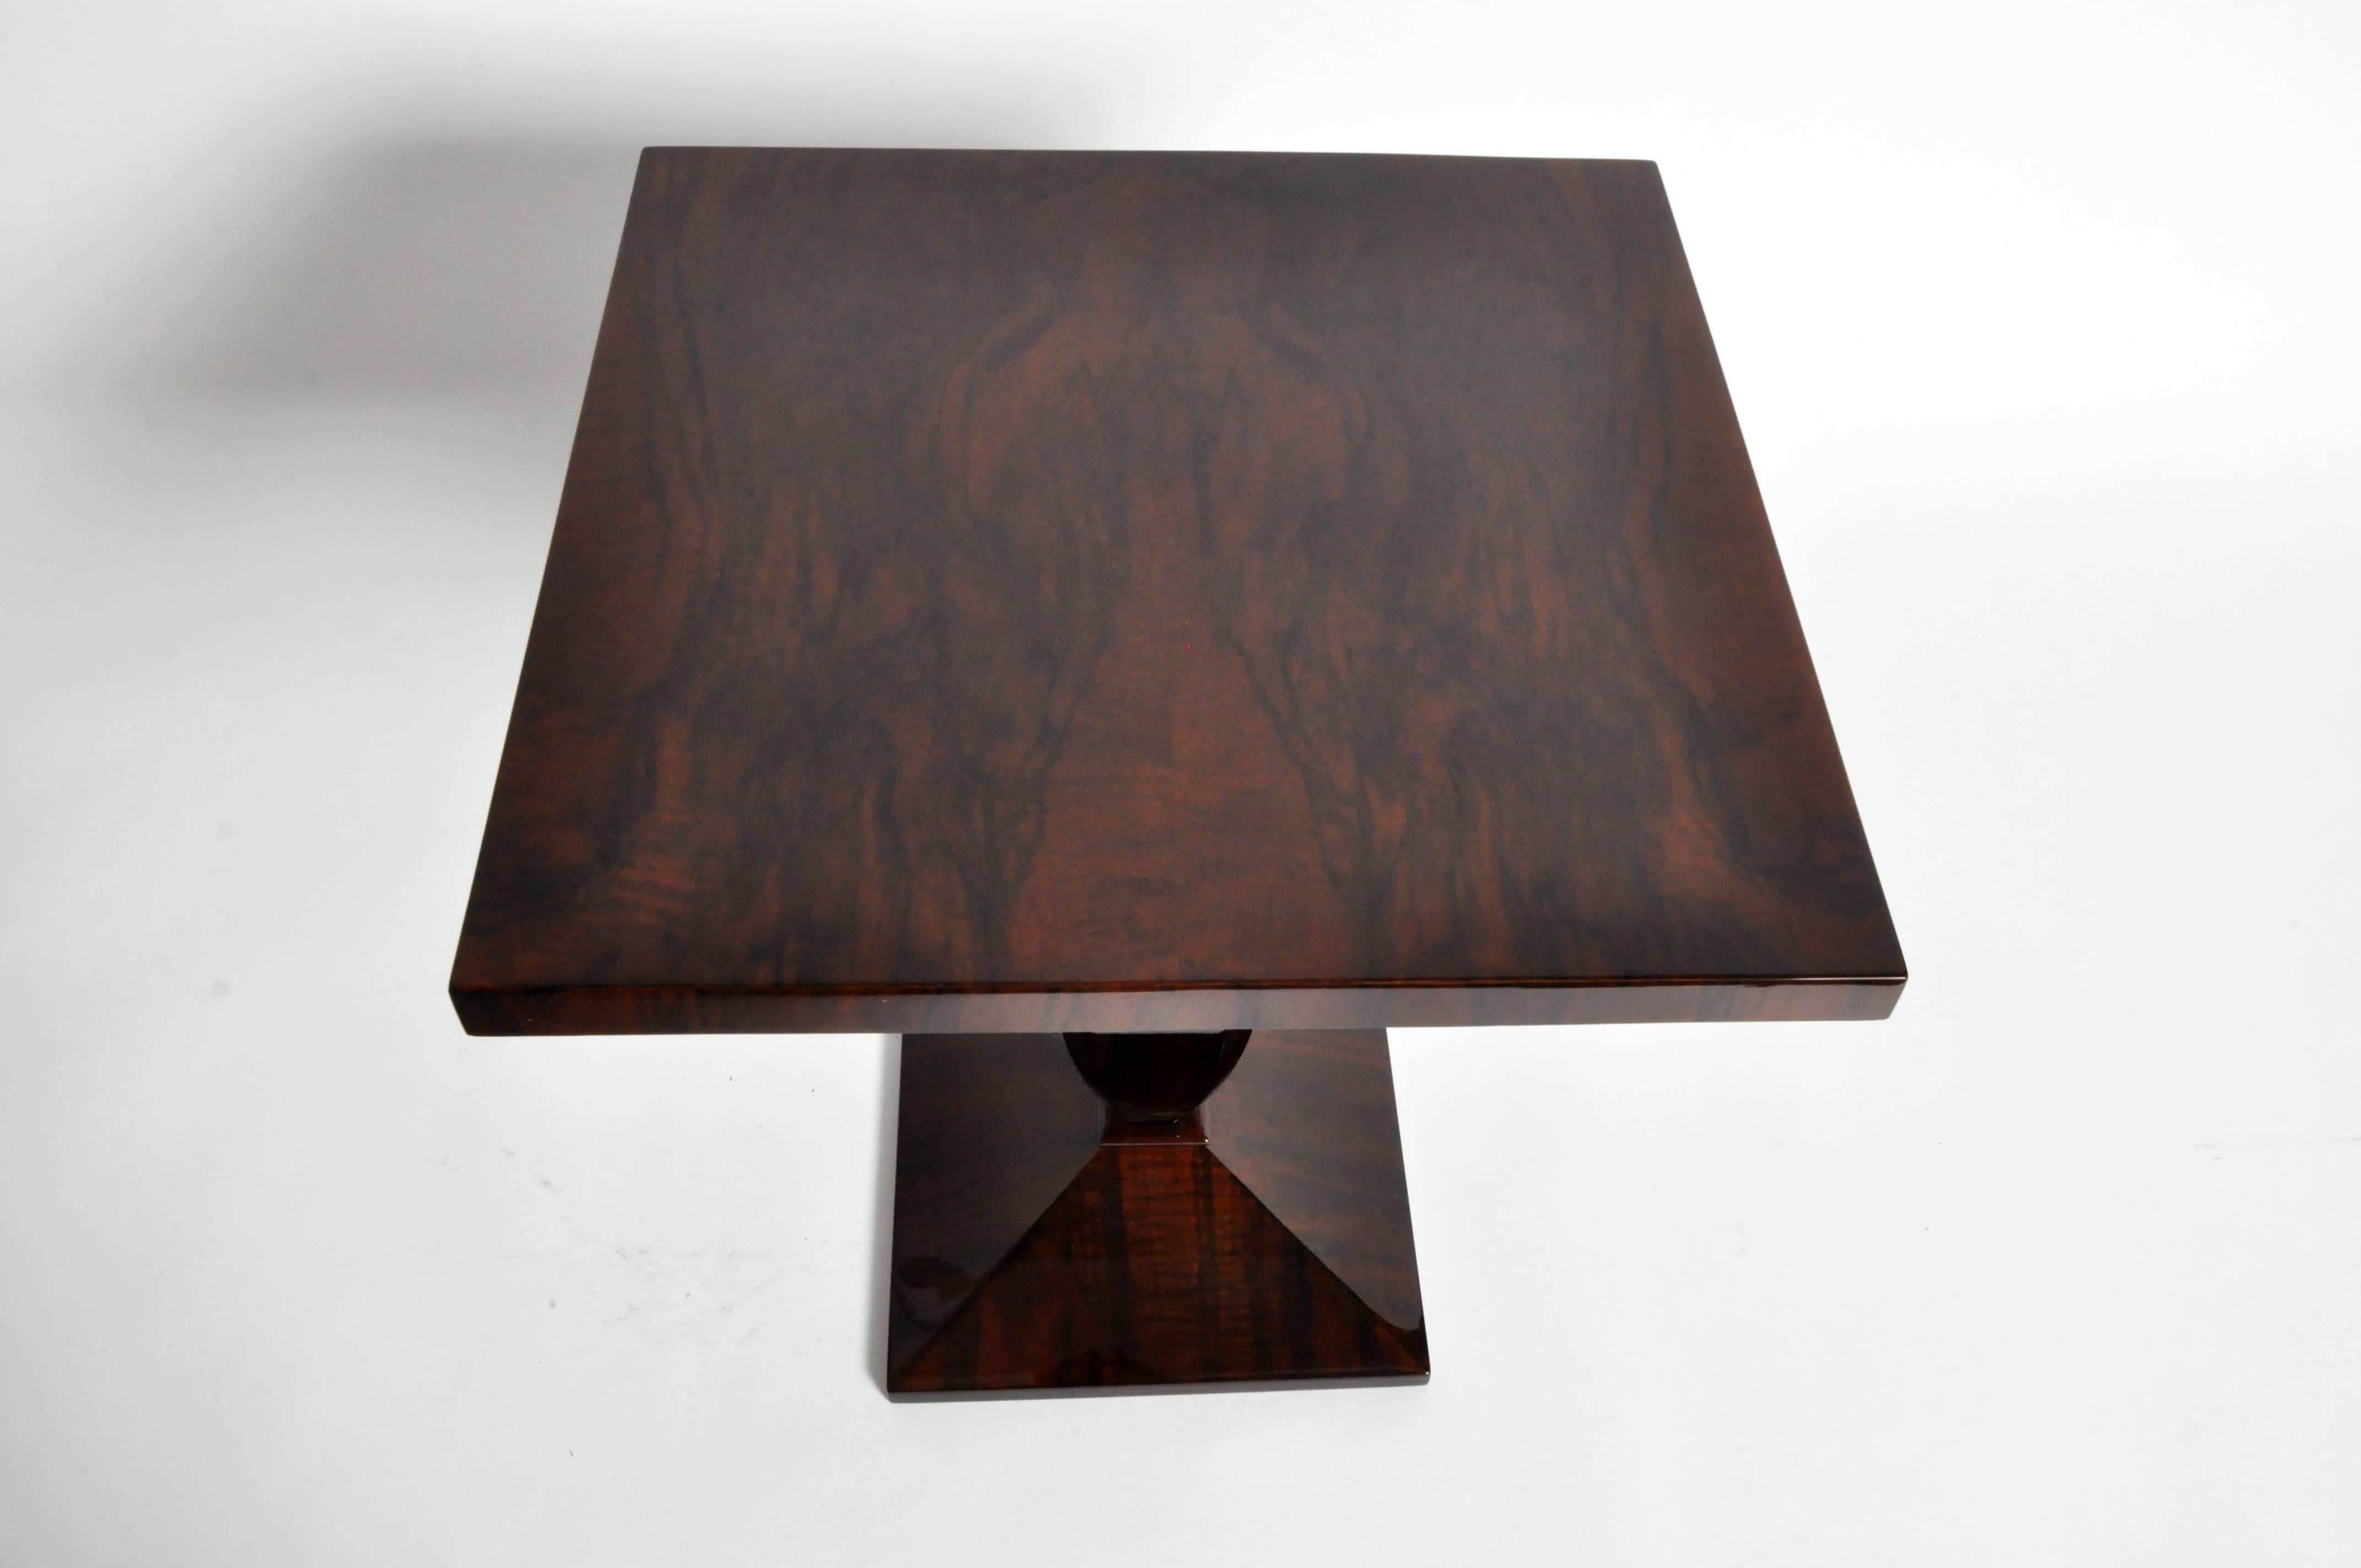 Hungarian Art Deco Style Square Side Tables